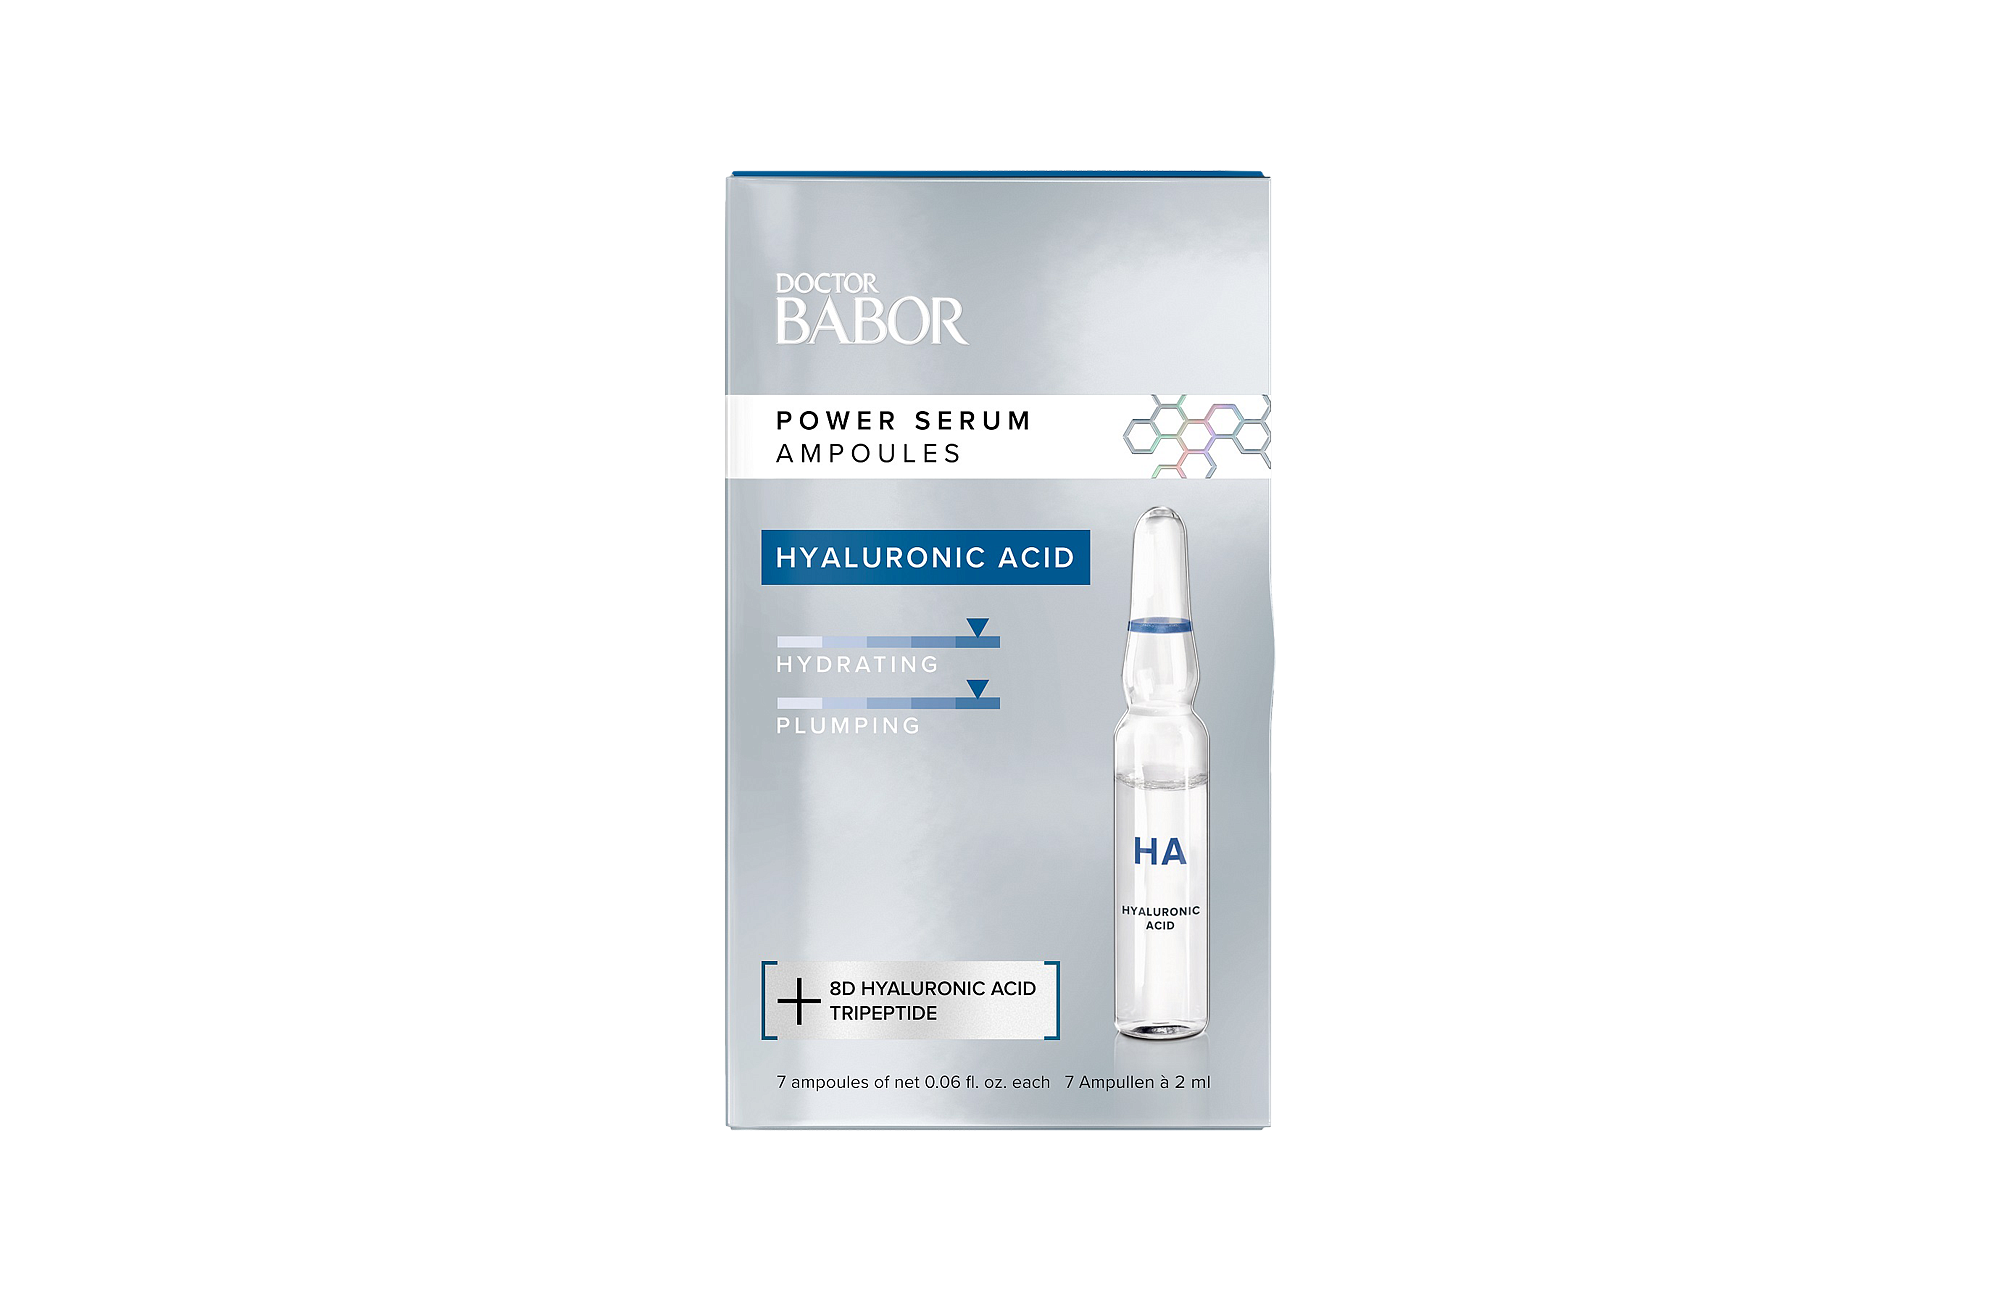 Power Serum Ampoules Hyaluronic Acid DOCTOR BABOR